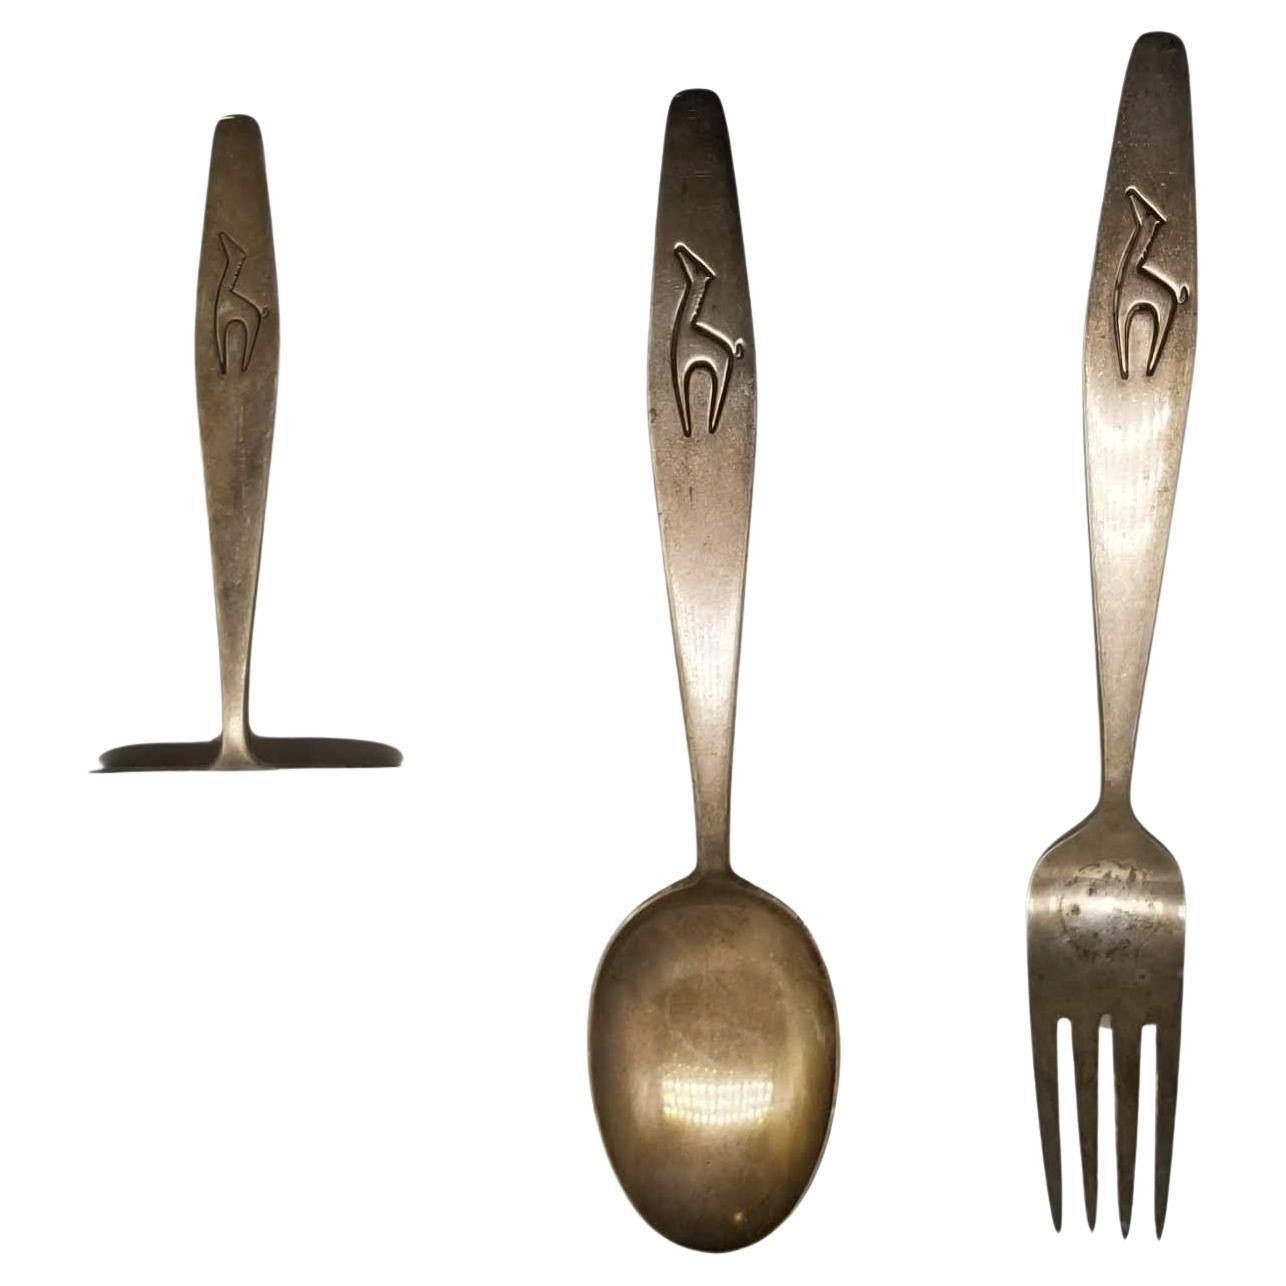 Antique Kids Set of 3, Silverware 830S by Mylius, Norway -1900s For Sale